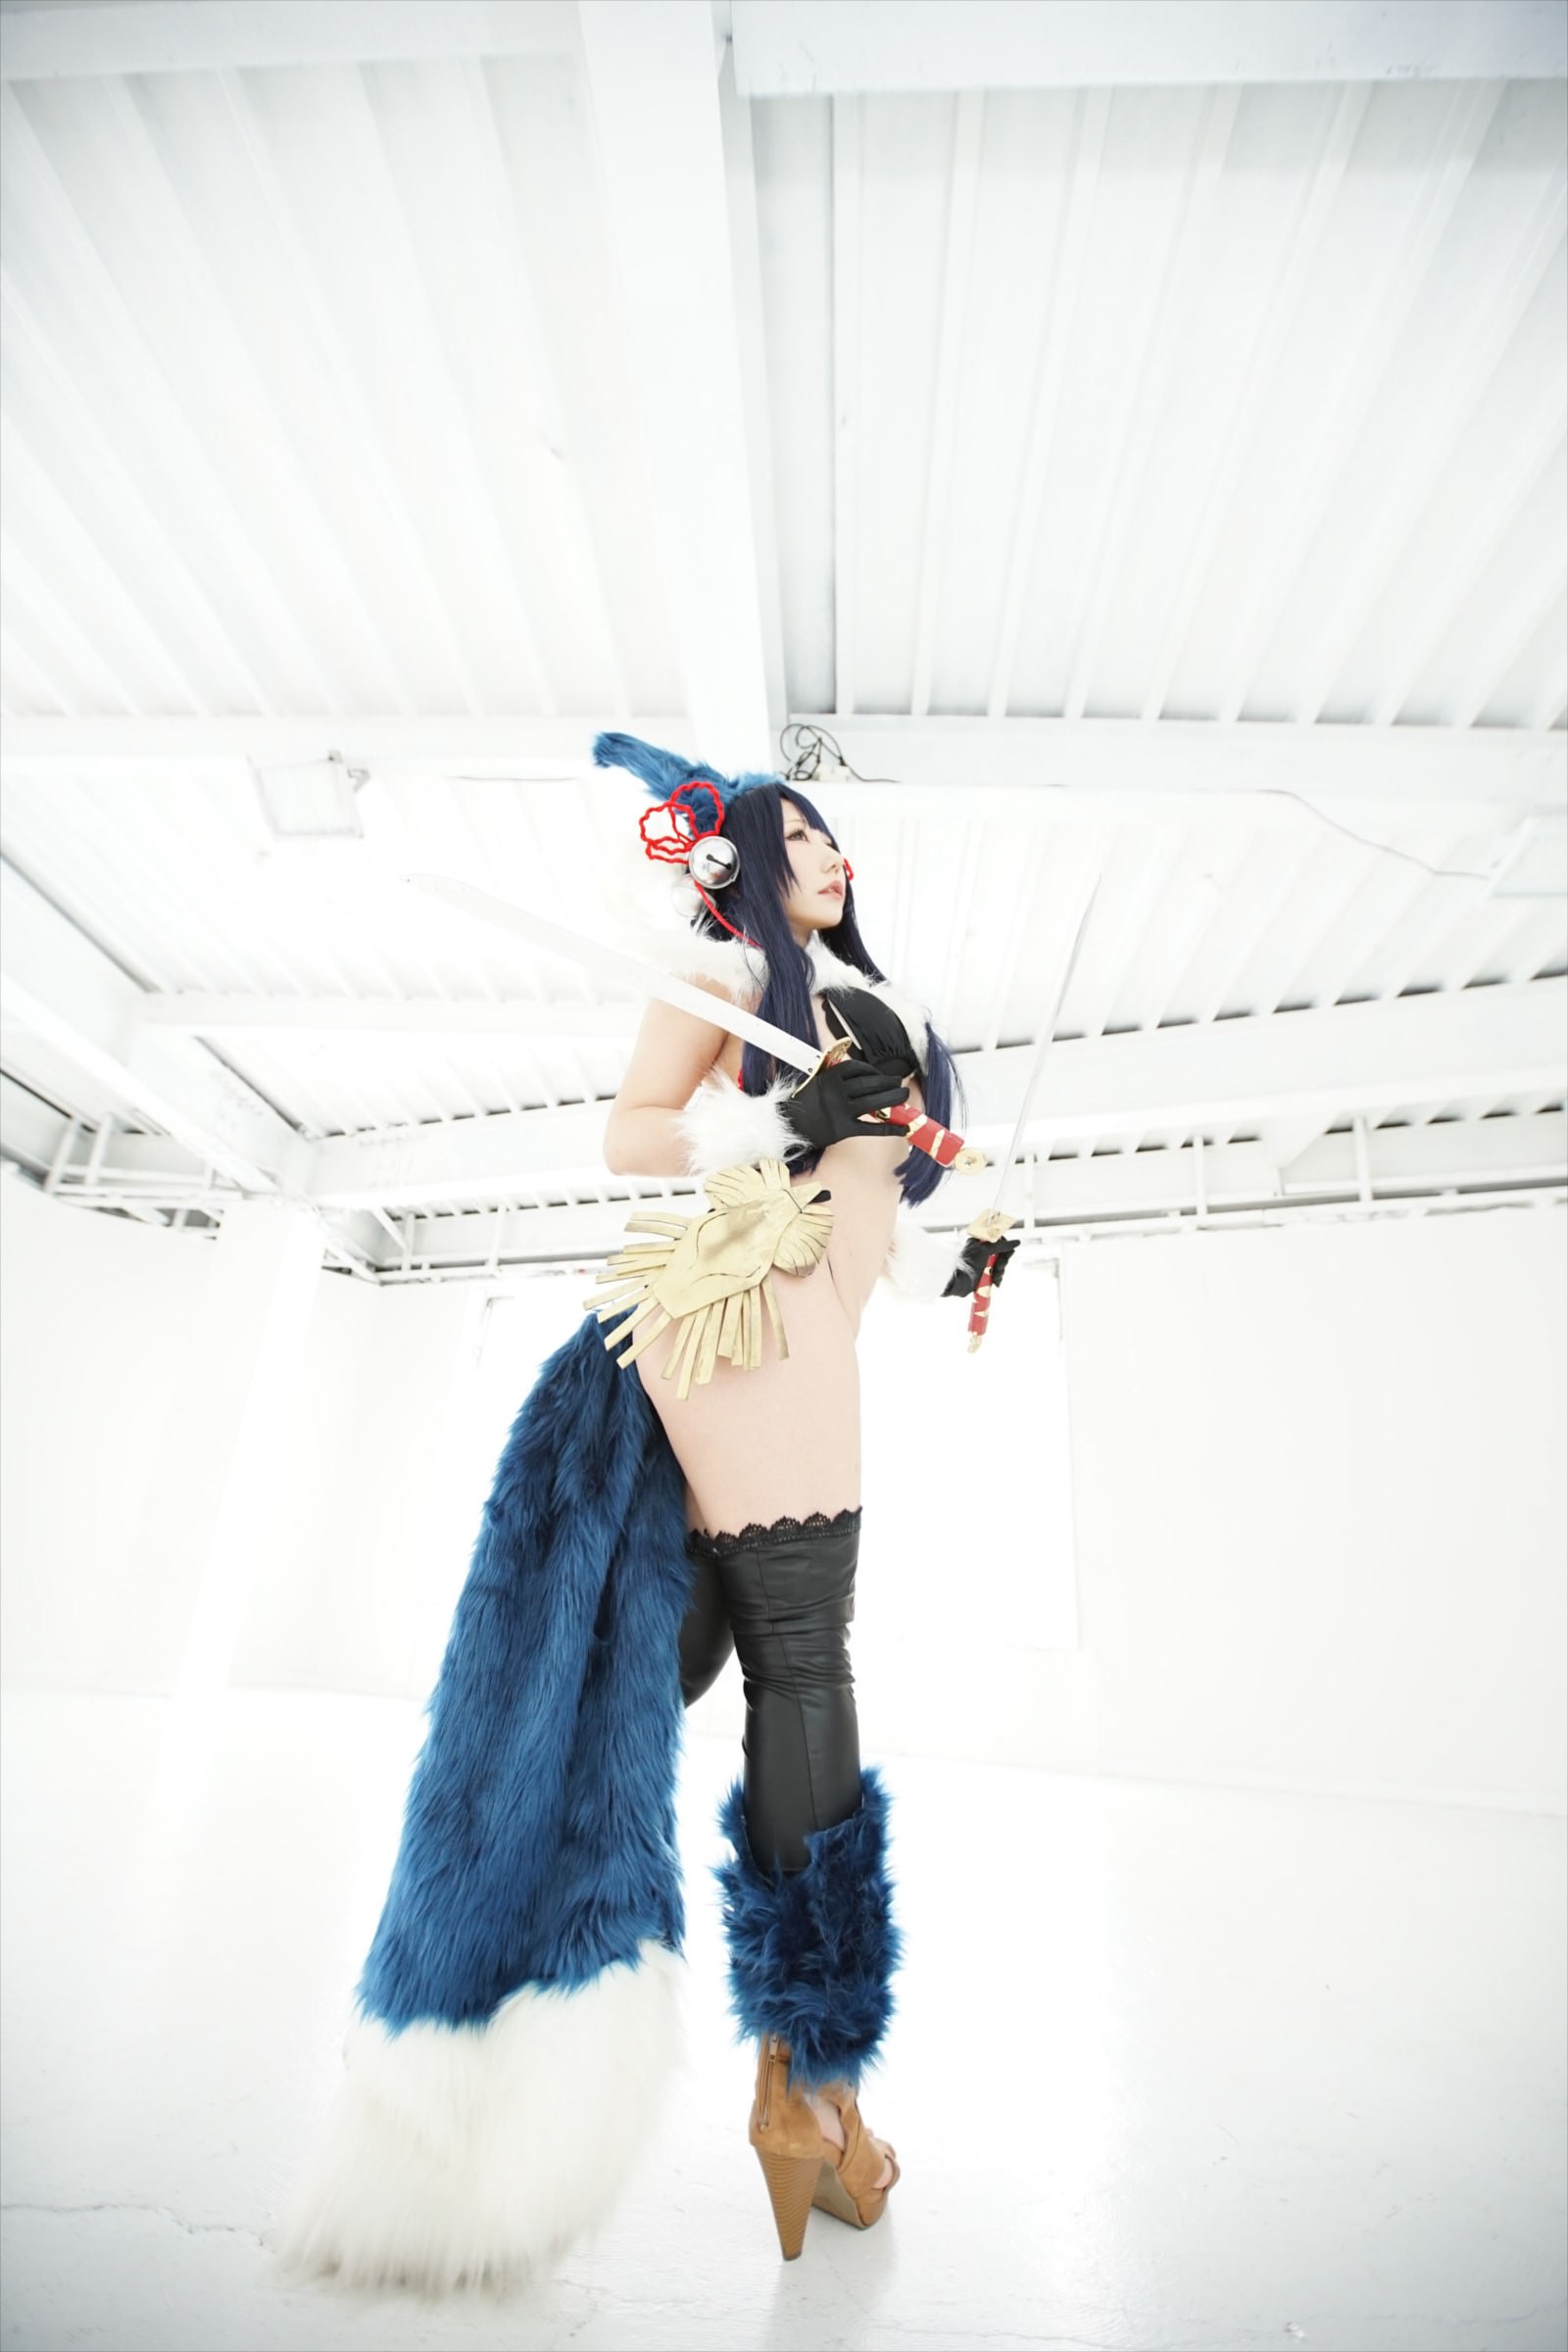 (Cosplay) (C91) Shooting Star (サク) TAILS FLUFFY 337P125MB2(7)